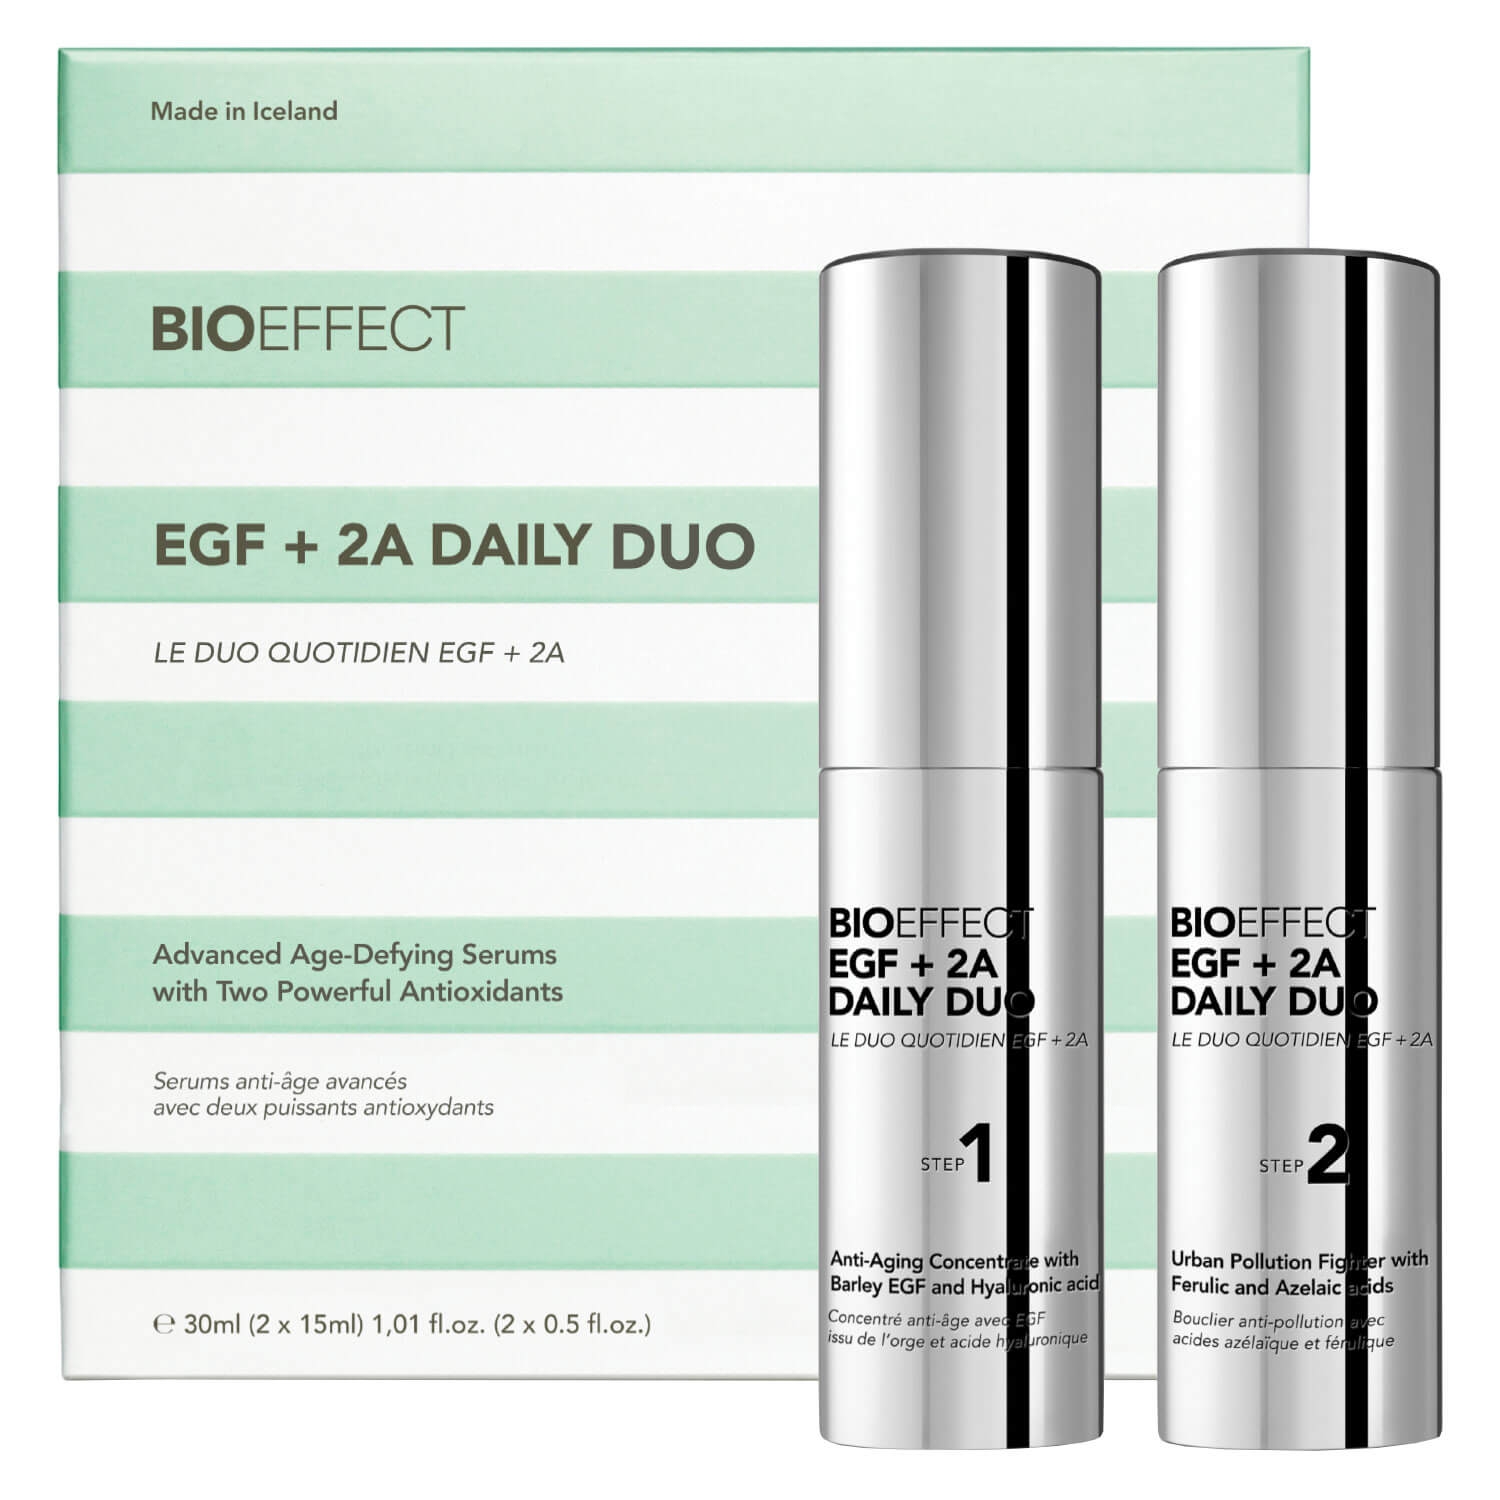 Product image from BIOEFFECT - EGF + 2A DAILY DUO